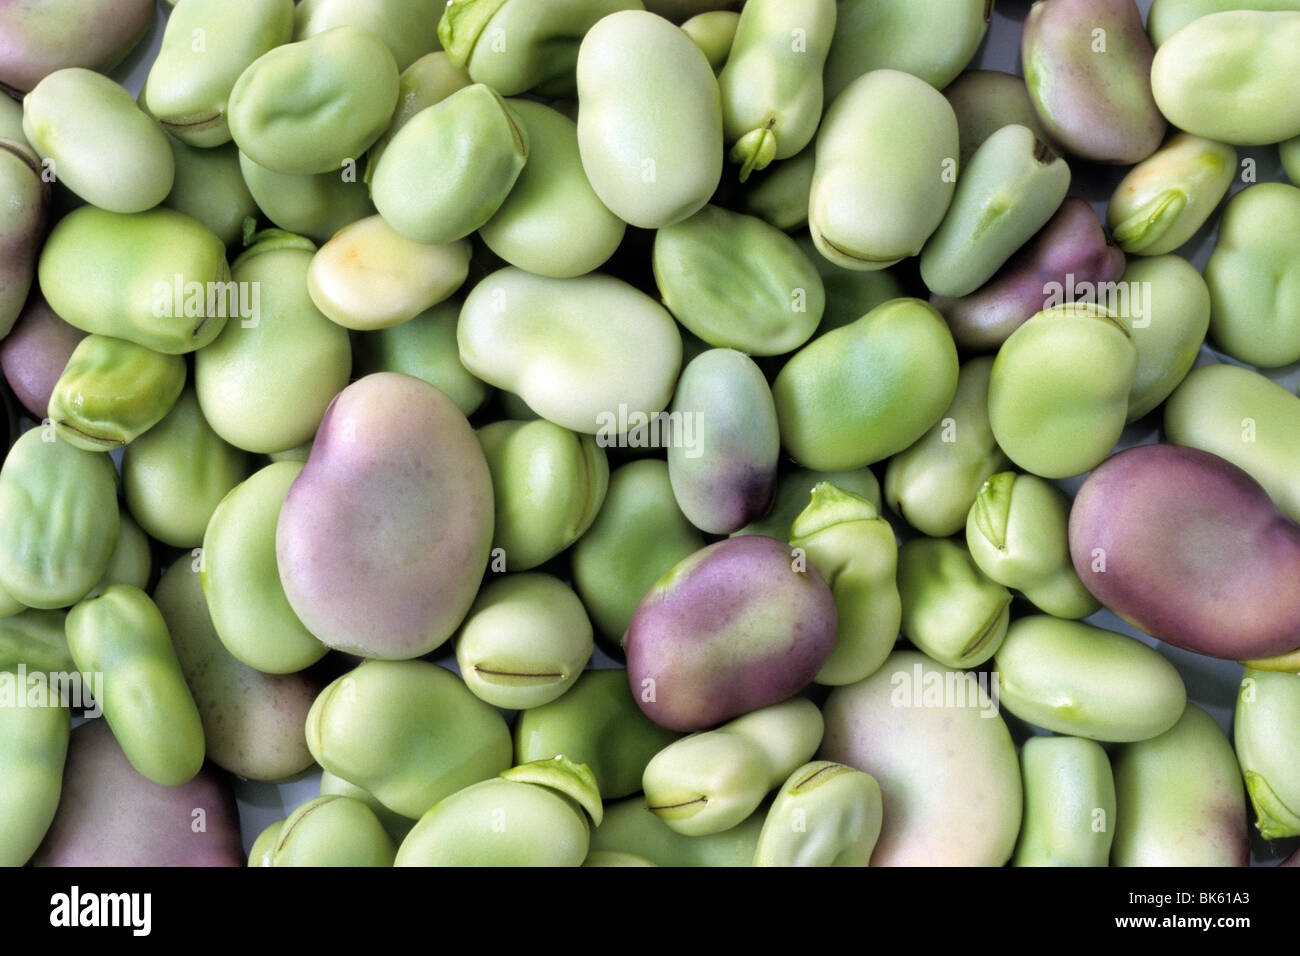 Broad Bean (Vicia faba), beans seen from above. Stock Photo